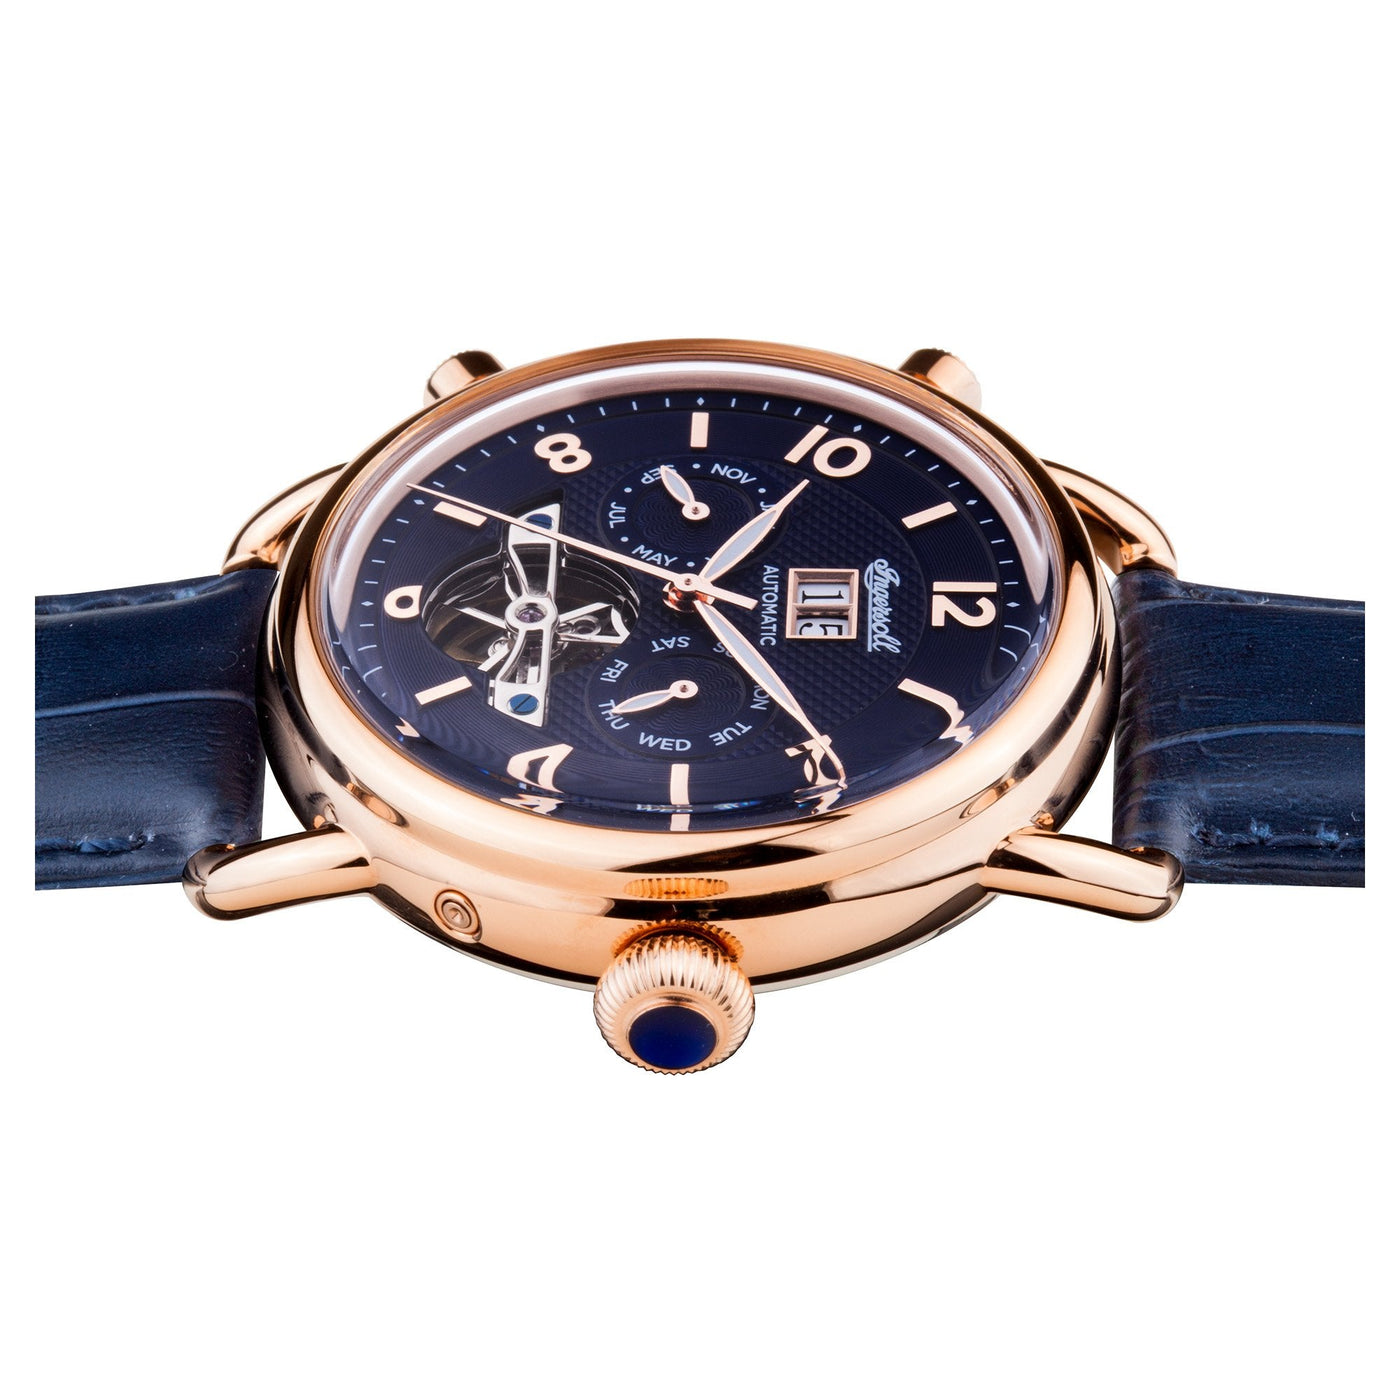 Ingersoll New England Automatic Blue Watch